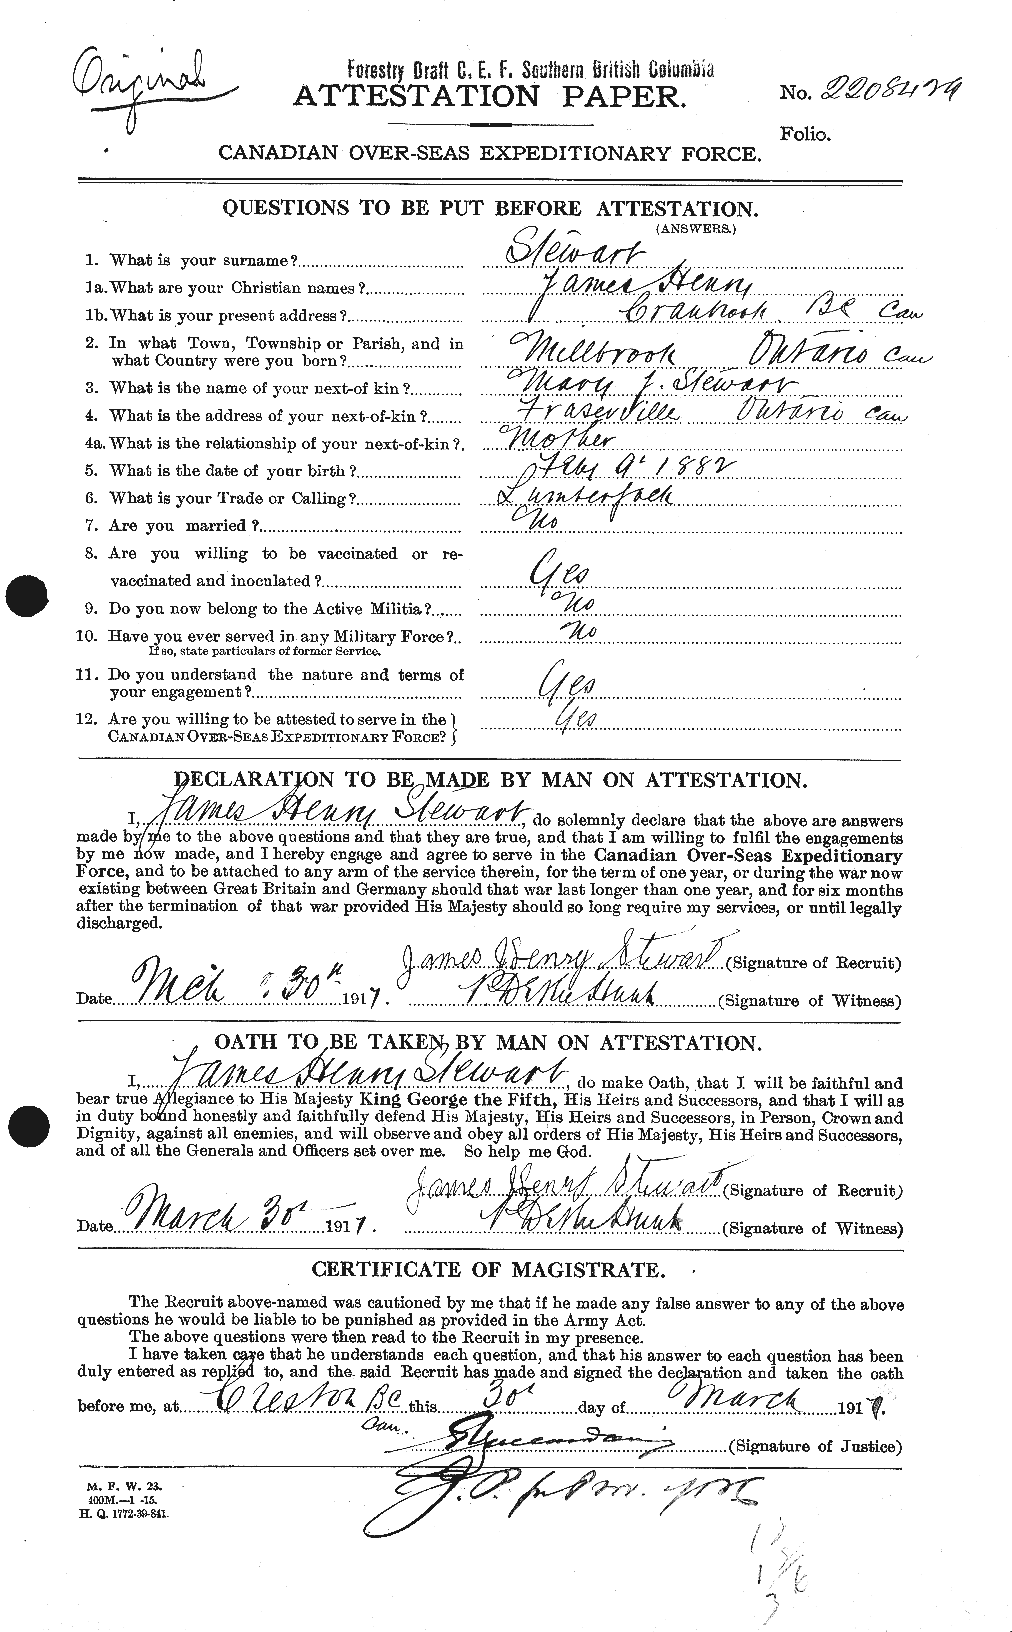 Personnel Records of the First World War - CEF 623493a